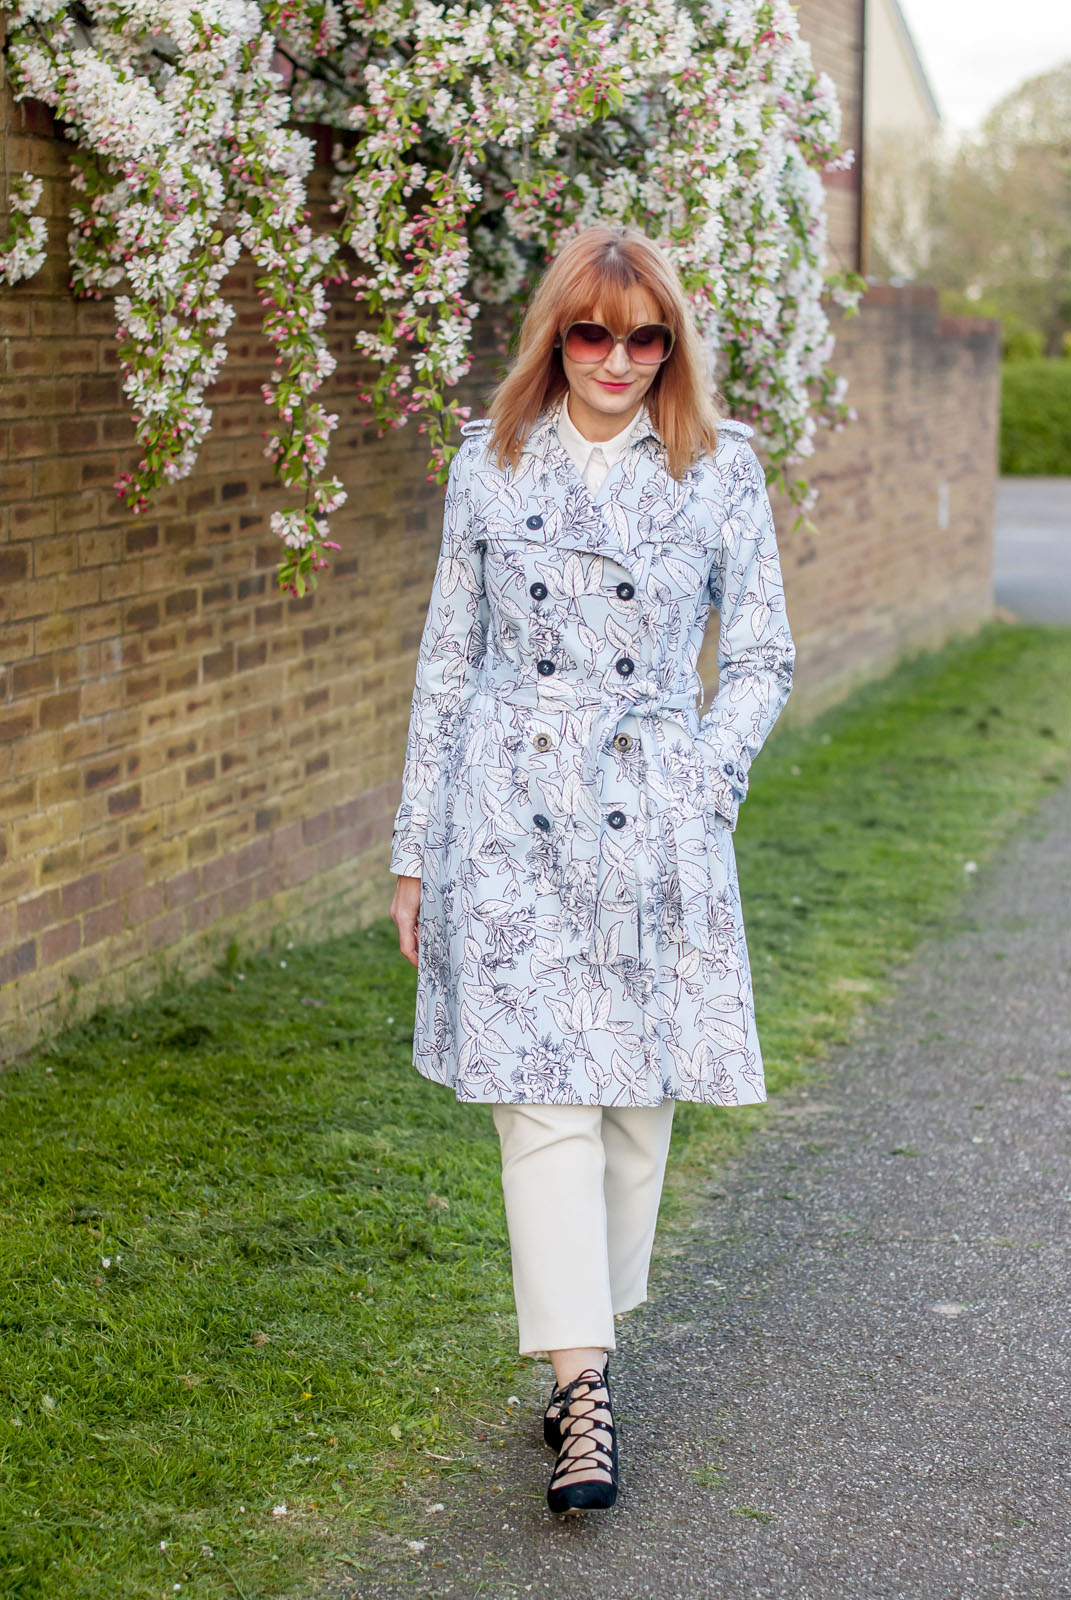 Spring fashion: Blue floral trench coat white trousers black lace-up ghillie shoes oversized 70s sunglasses | Not Dressed As Lamb, over 40 style